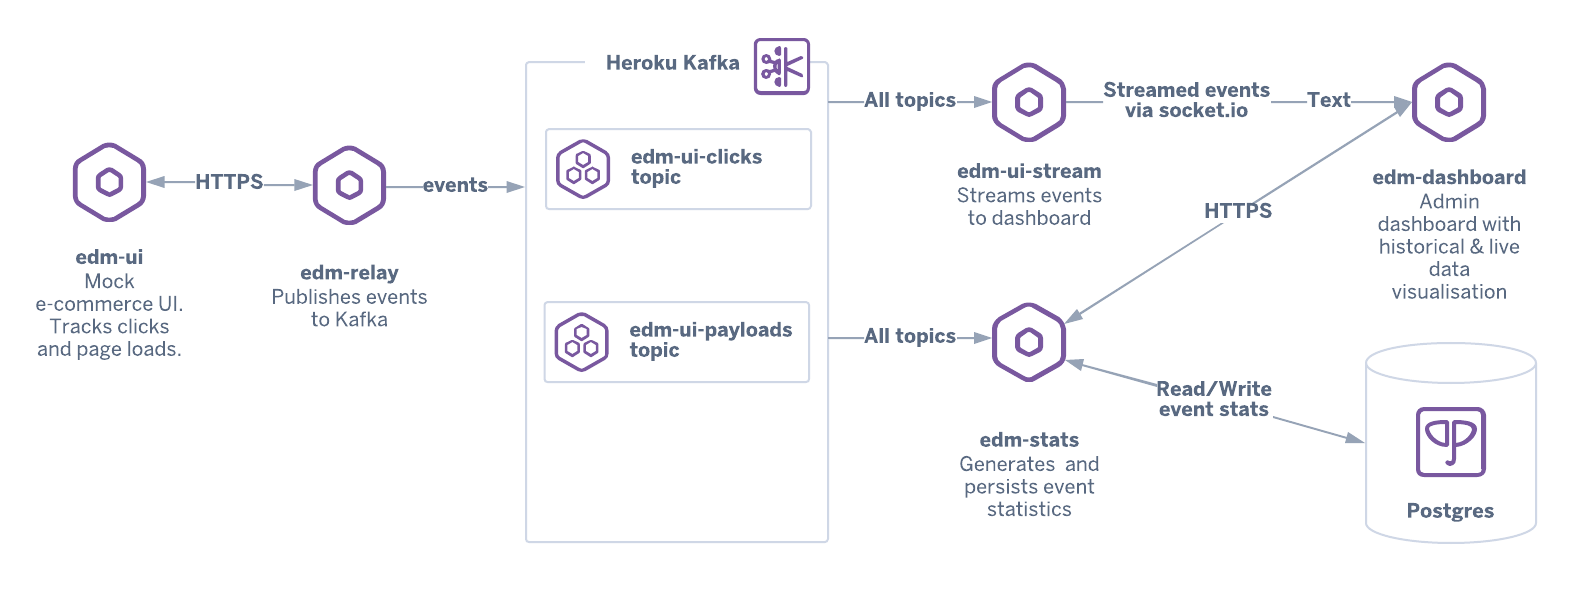 architecture diagram connecting microservices to a dashboard and a back-end data service via Apache Kafka